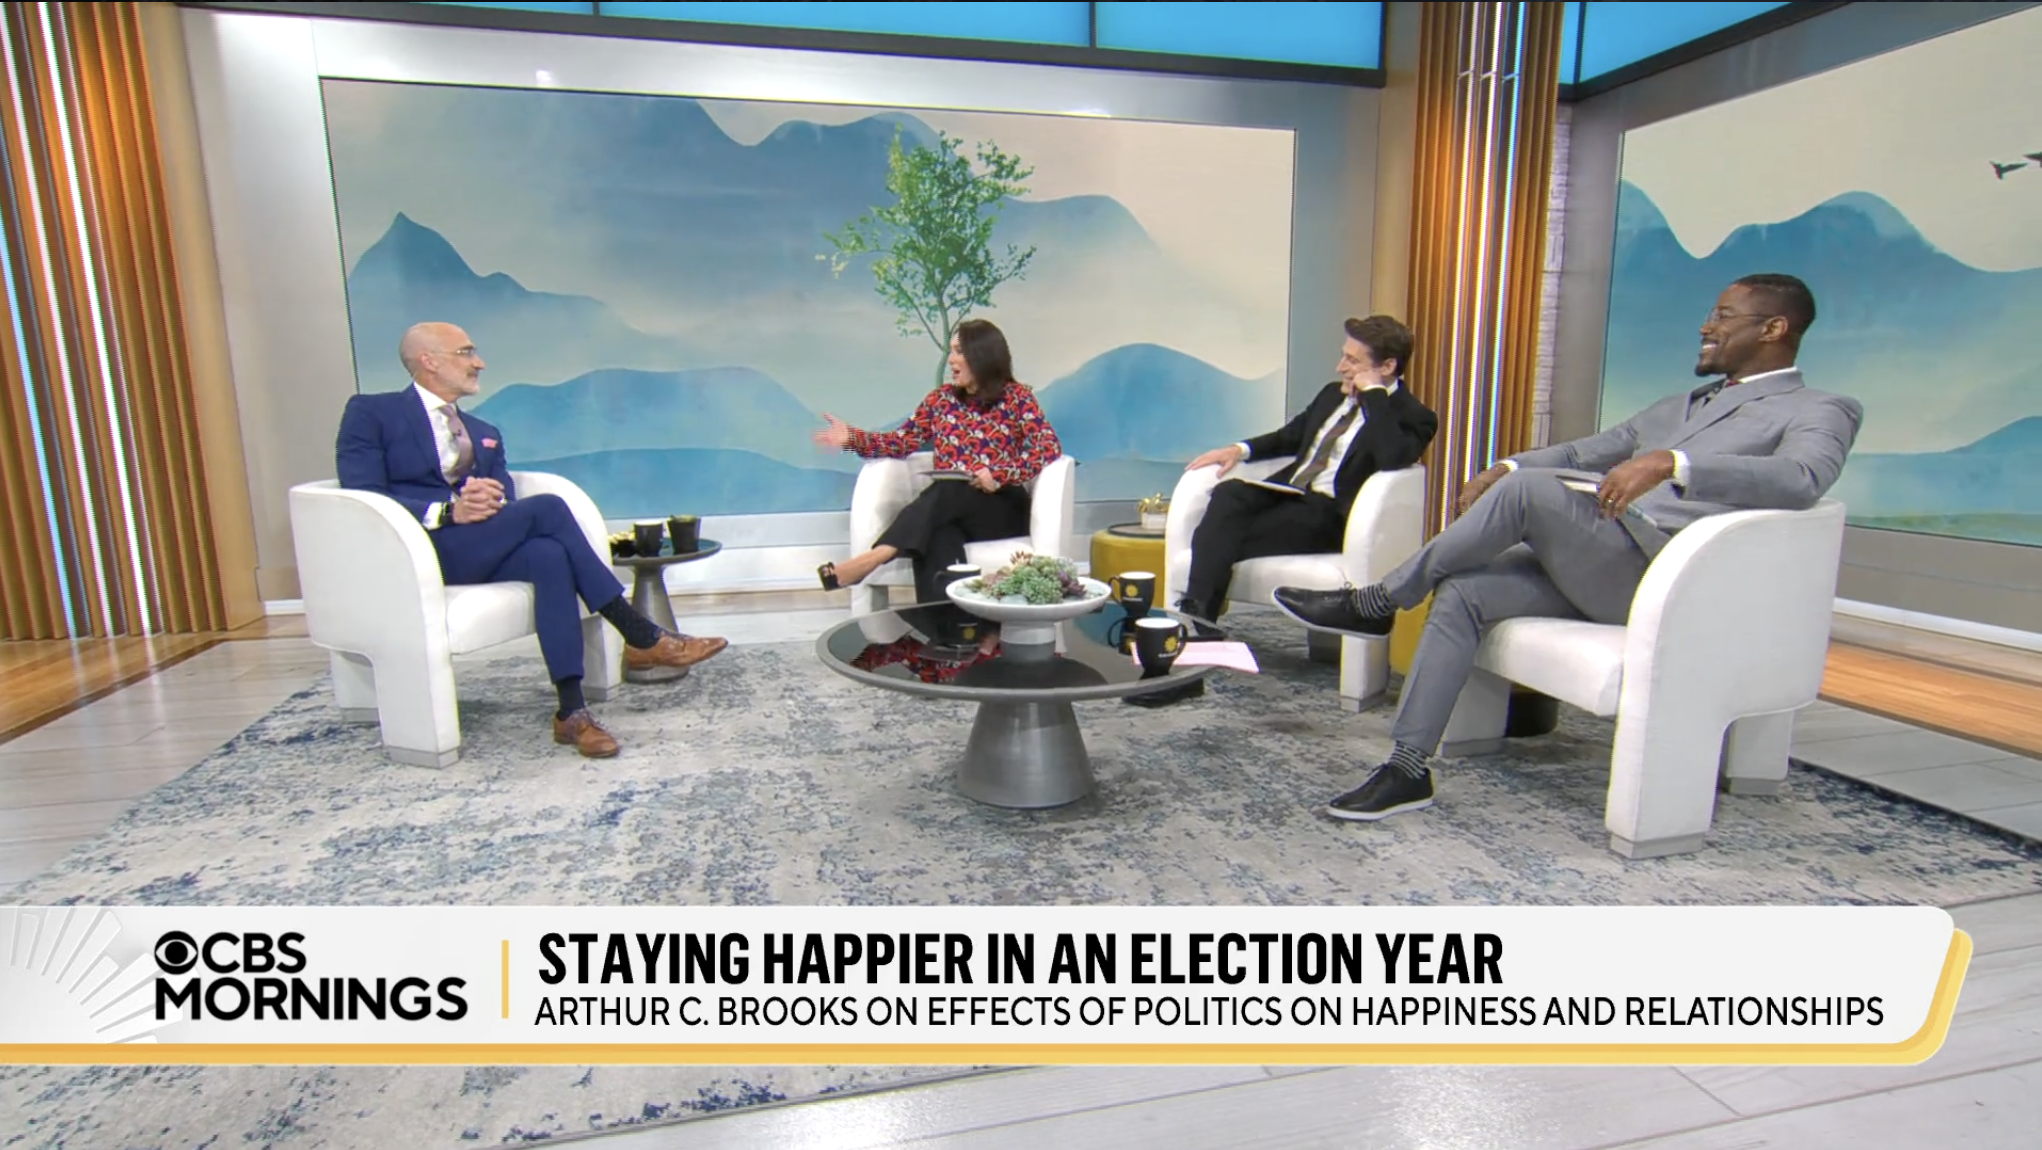 CBS Mornings: Staying Happier in an Election Year